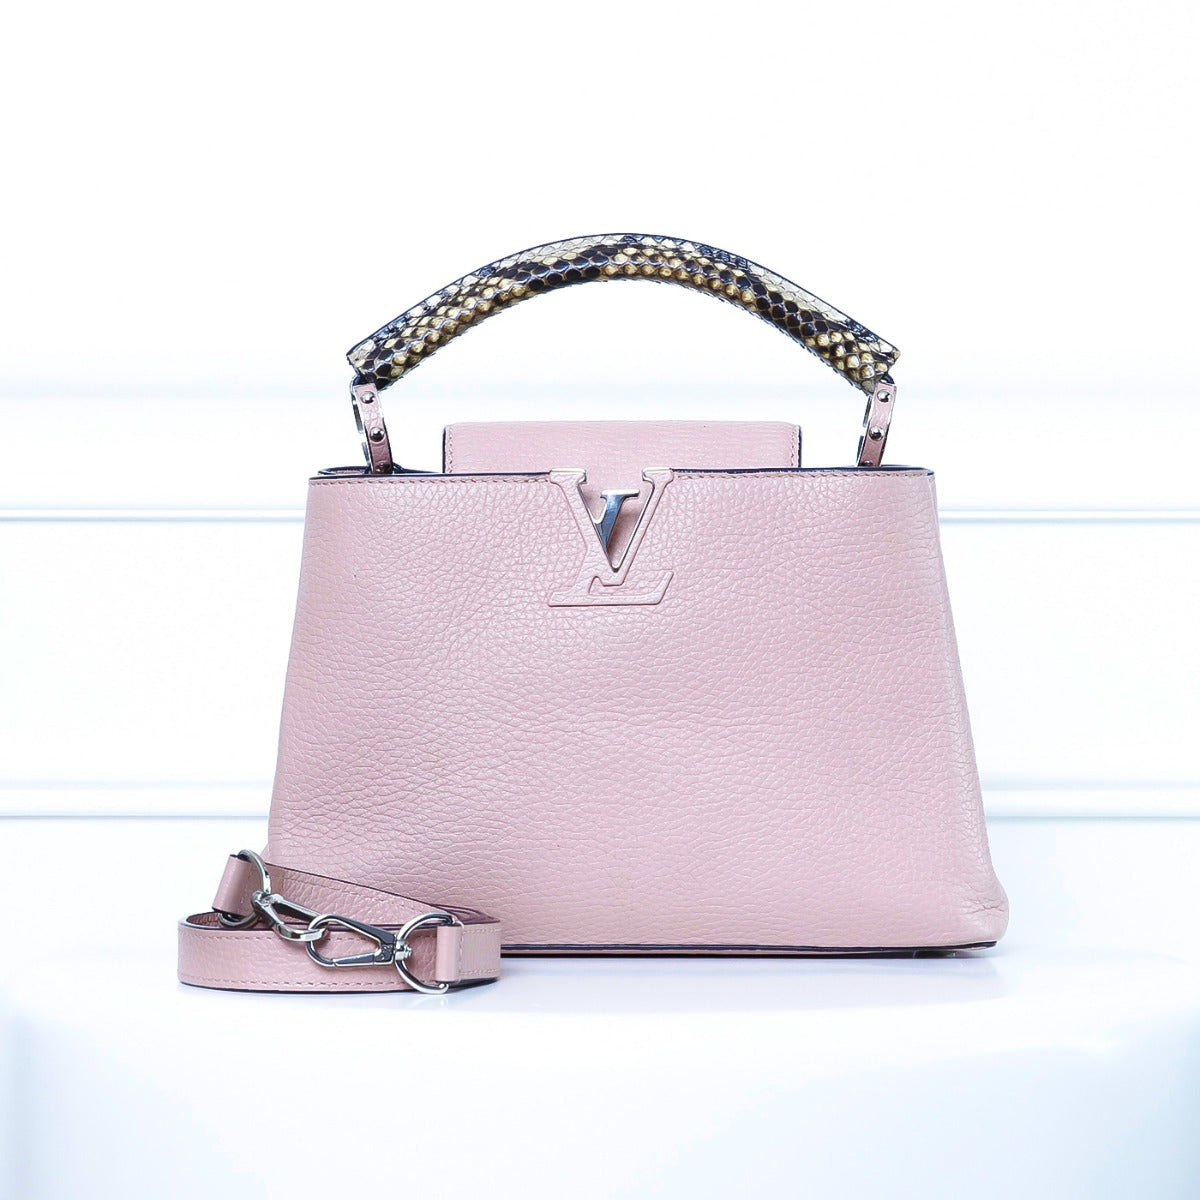 Louis Vuitton Light Pink with Python Handle Capucines BB